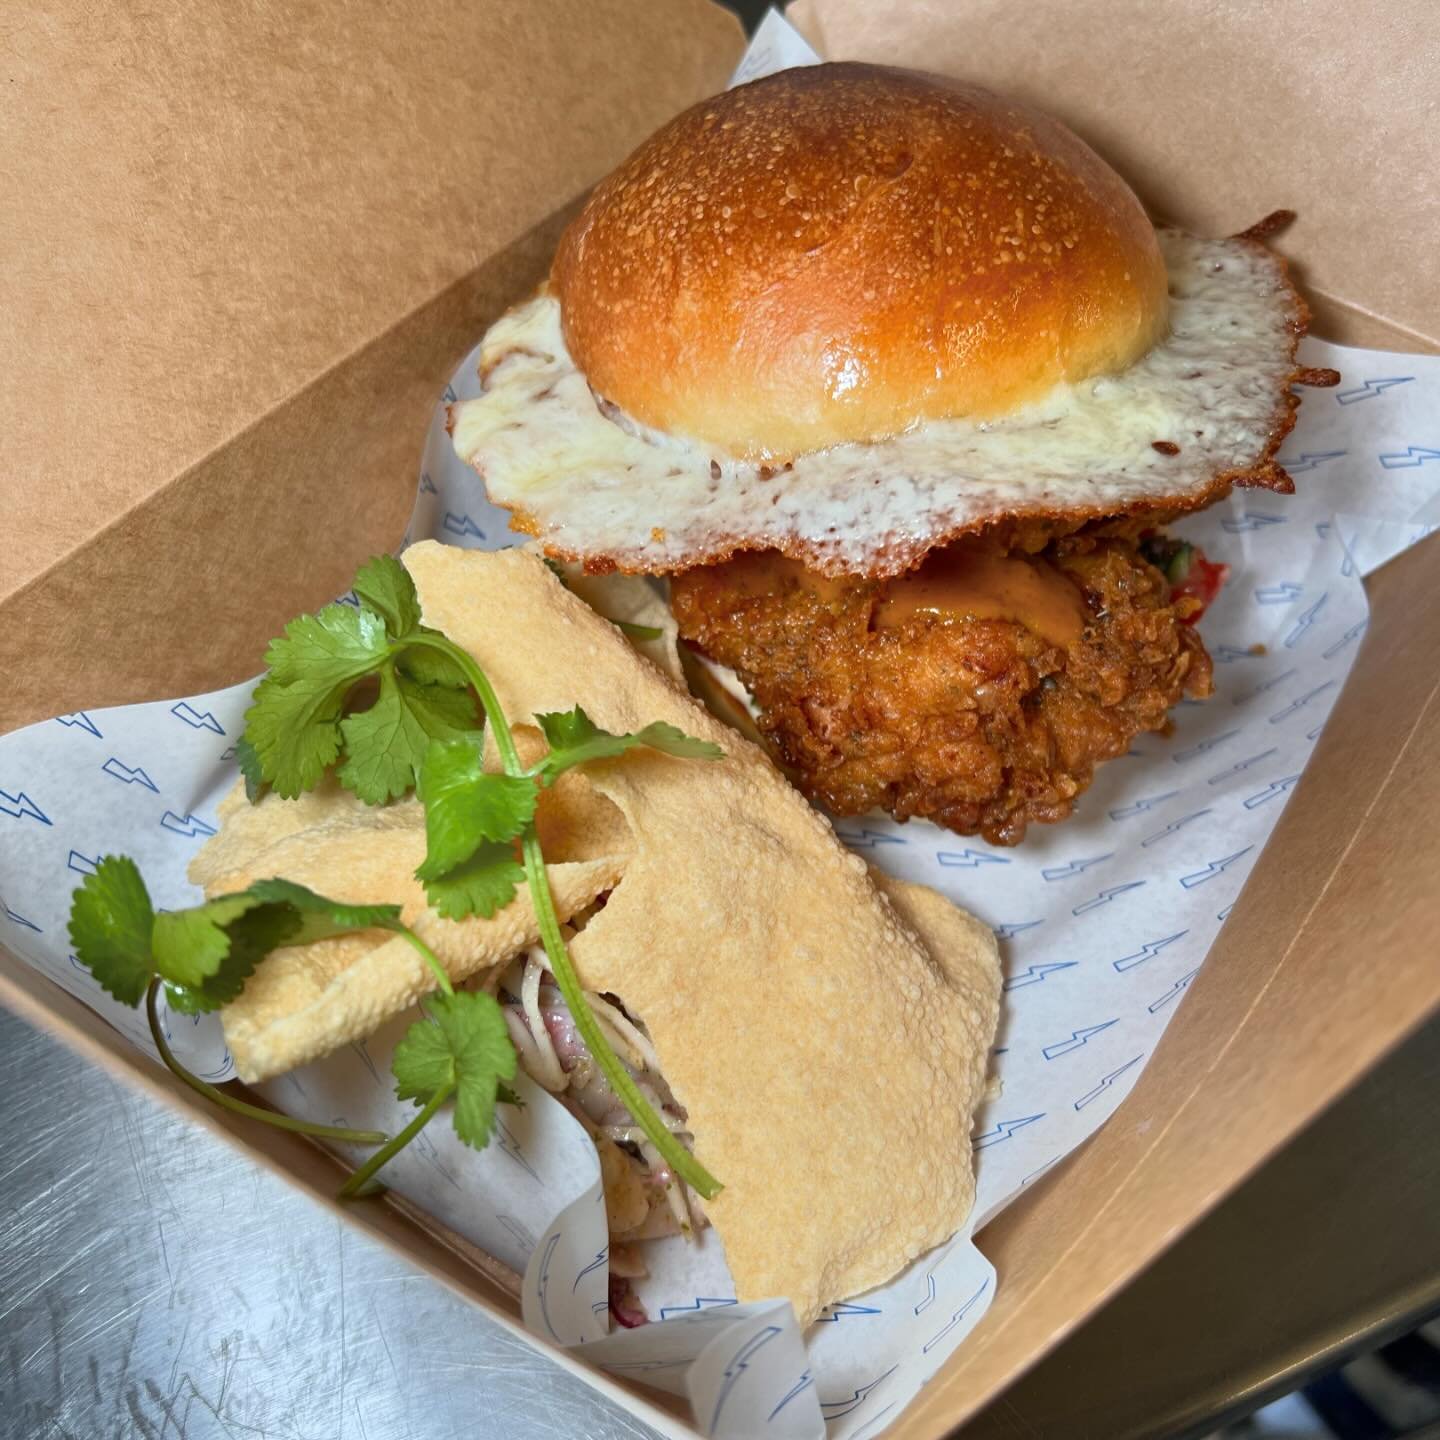 SATURDAY LUNCH SPECIAL : 11th : 💥 DON&rsquo;T MISS THIS ONE

Curry fried chicken 

Or 

(Not pictured) Fried cauliflower

In a challah bun, masala sauce, fried mozzarella, tomato, mango &amp; cucumber salsa, cabbage salad, popadom &pound;12

(Not pi